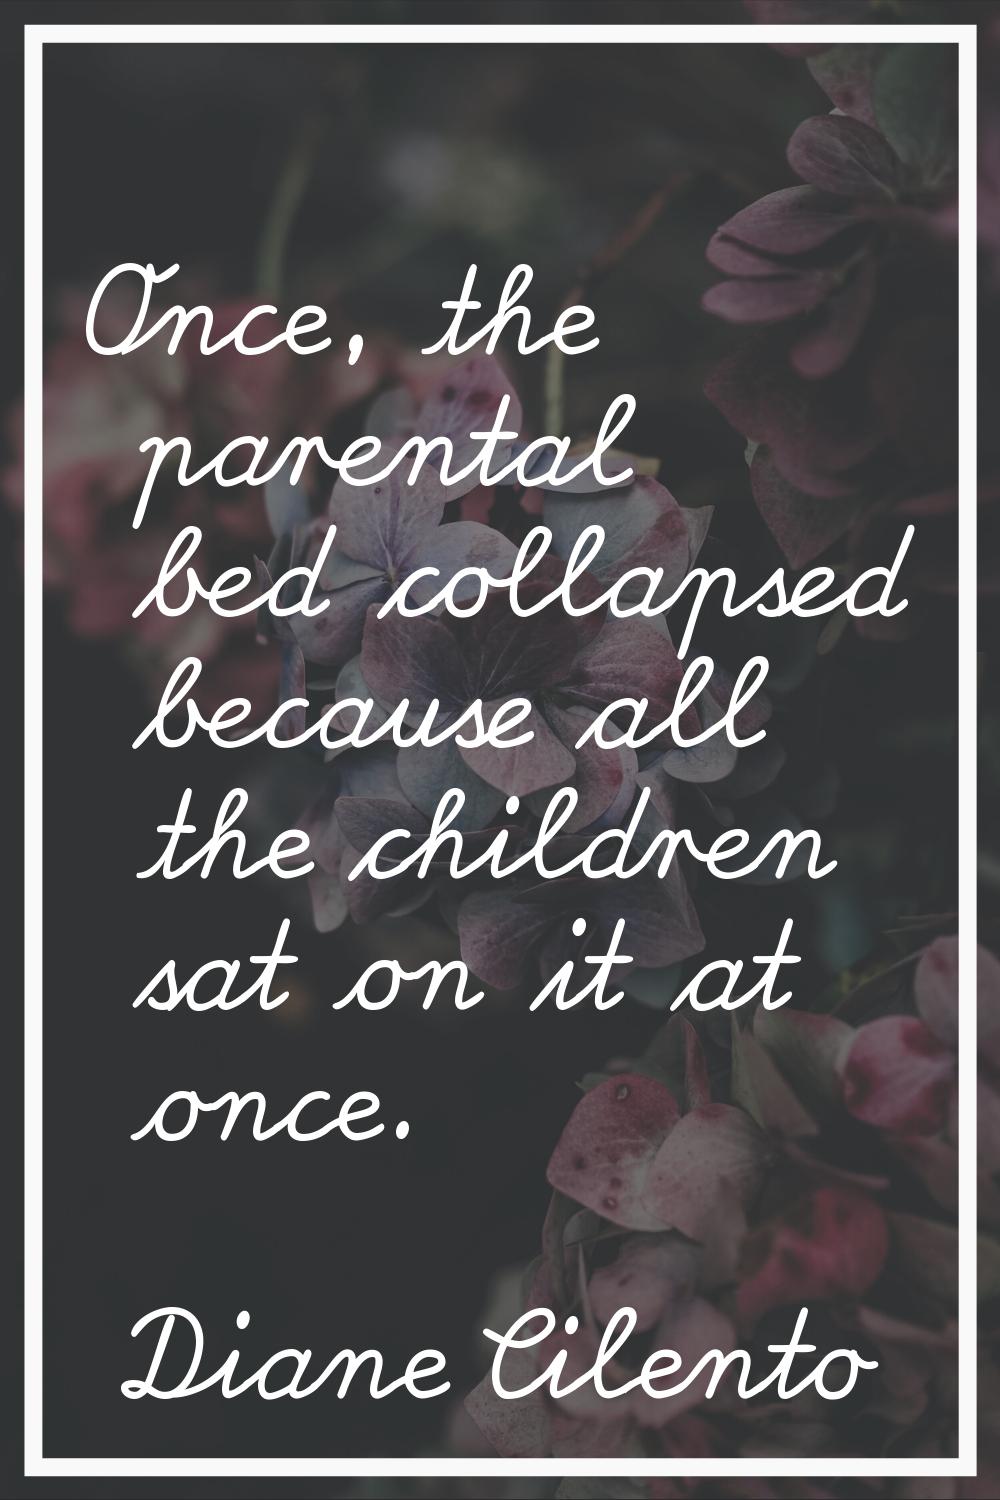 Once, the parental bed collapsed because all the children sat on it at once.